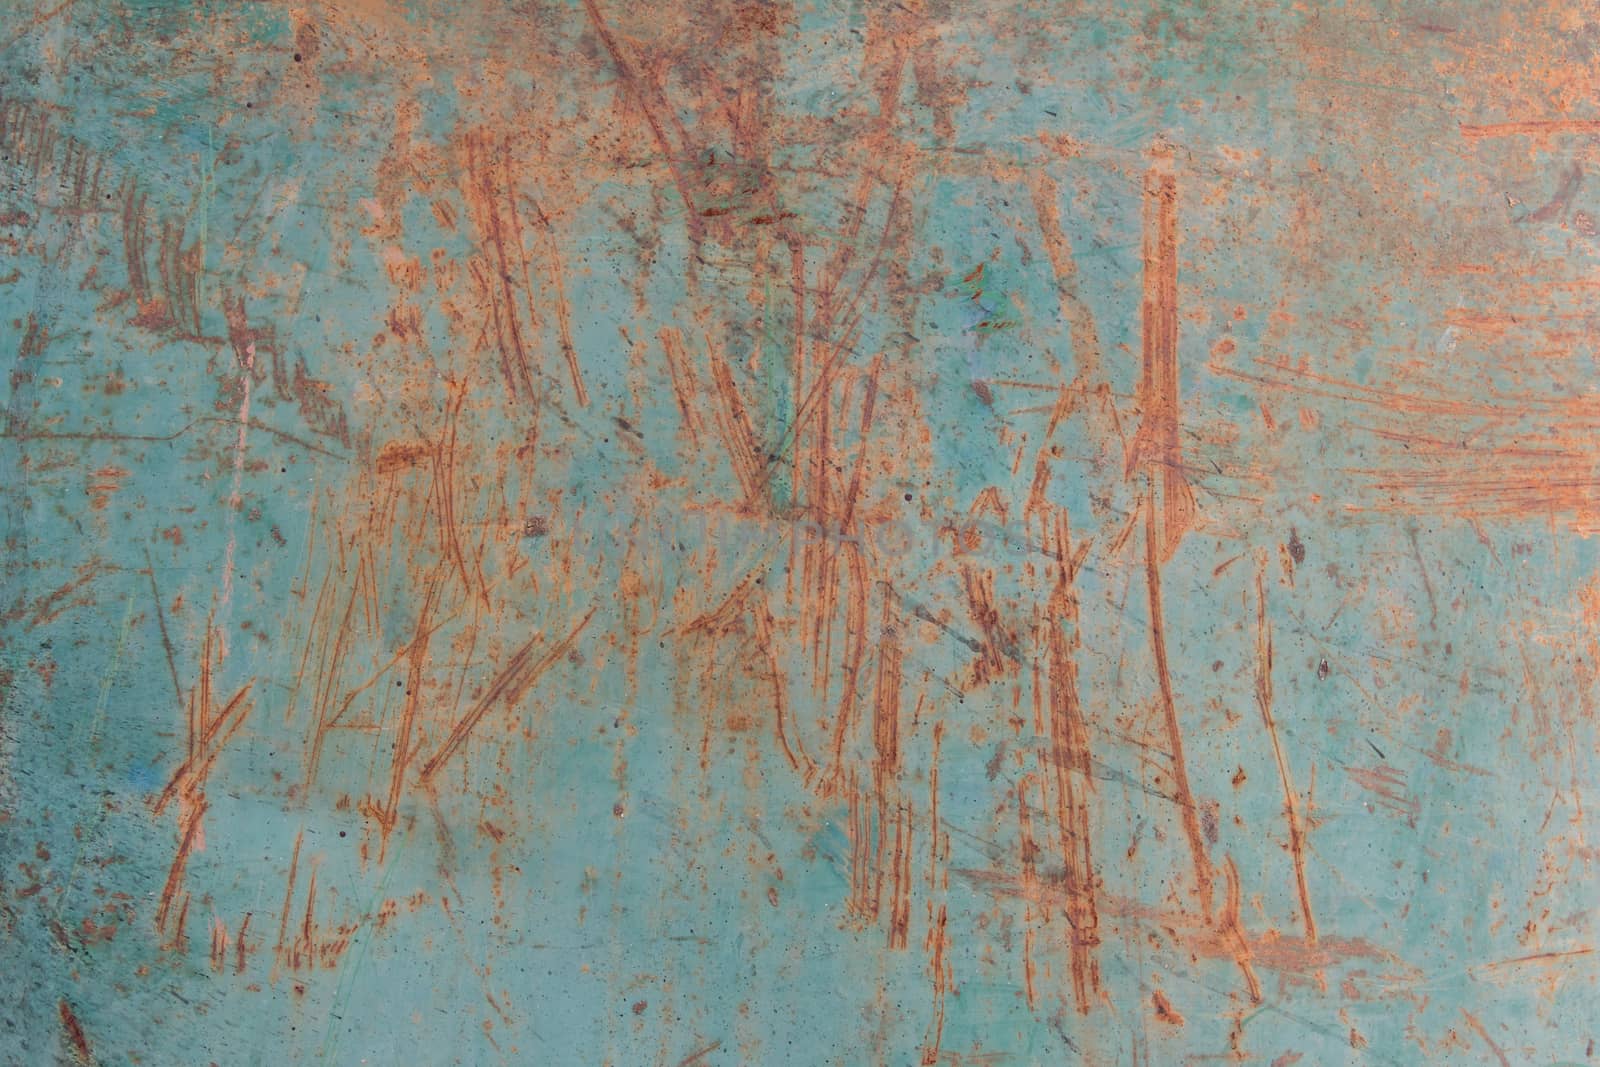 Rusty metal grunge background and scratch by vitawin